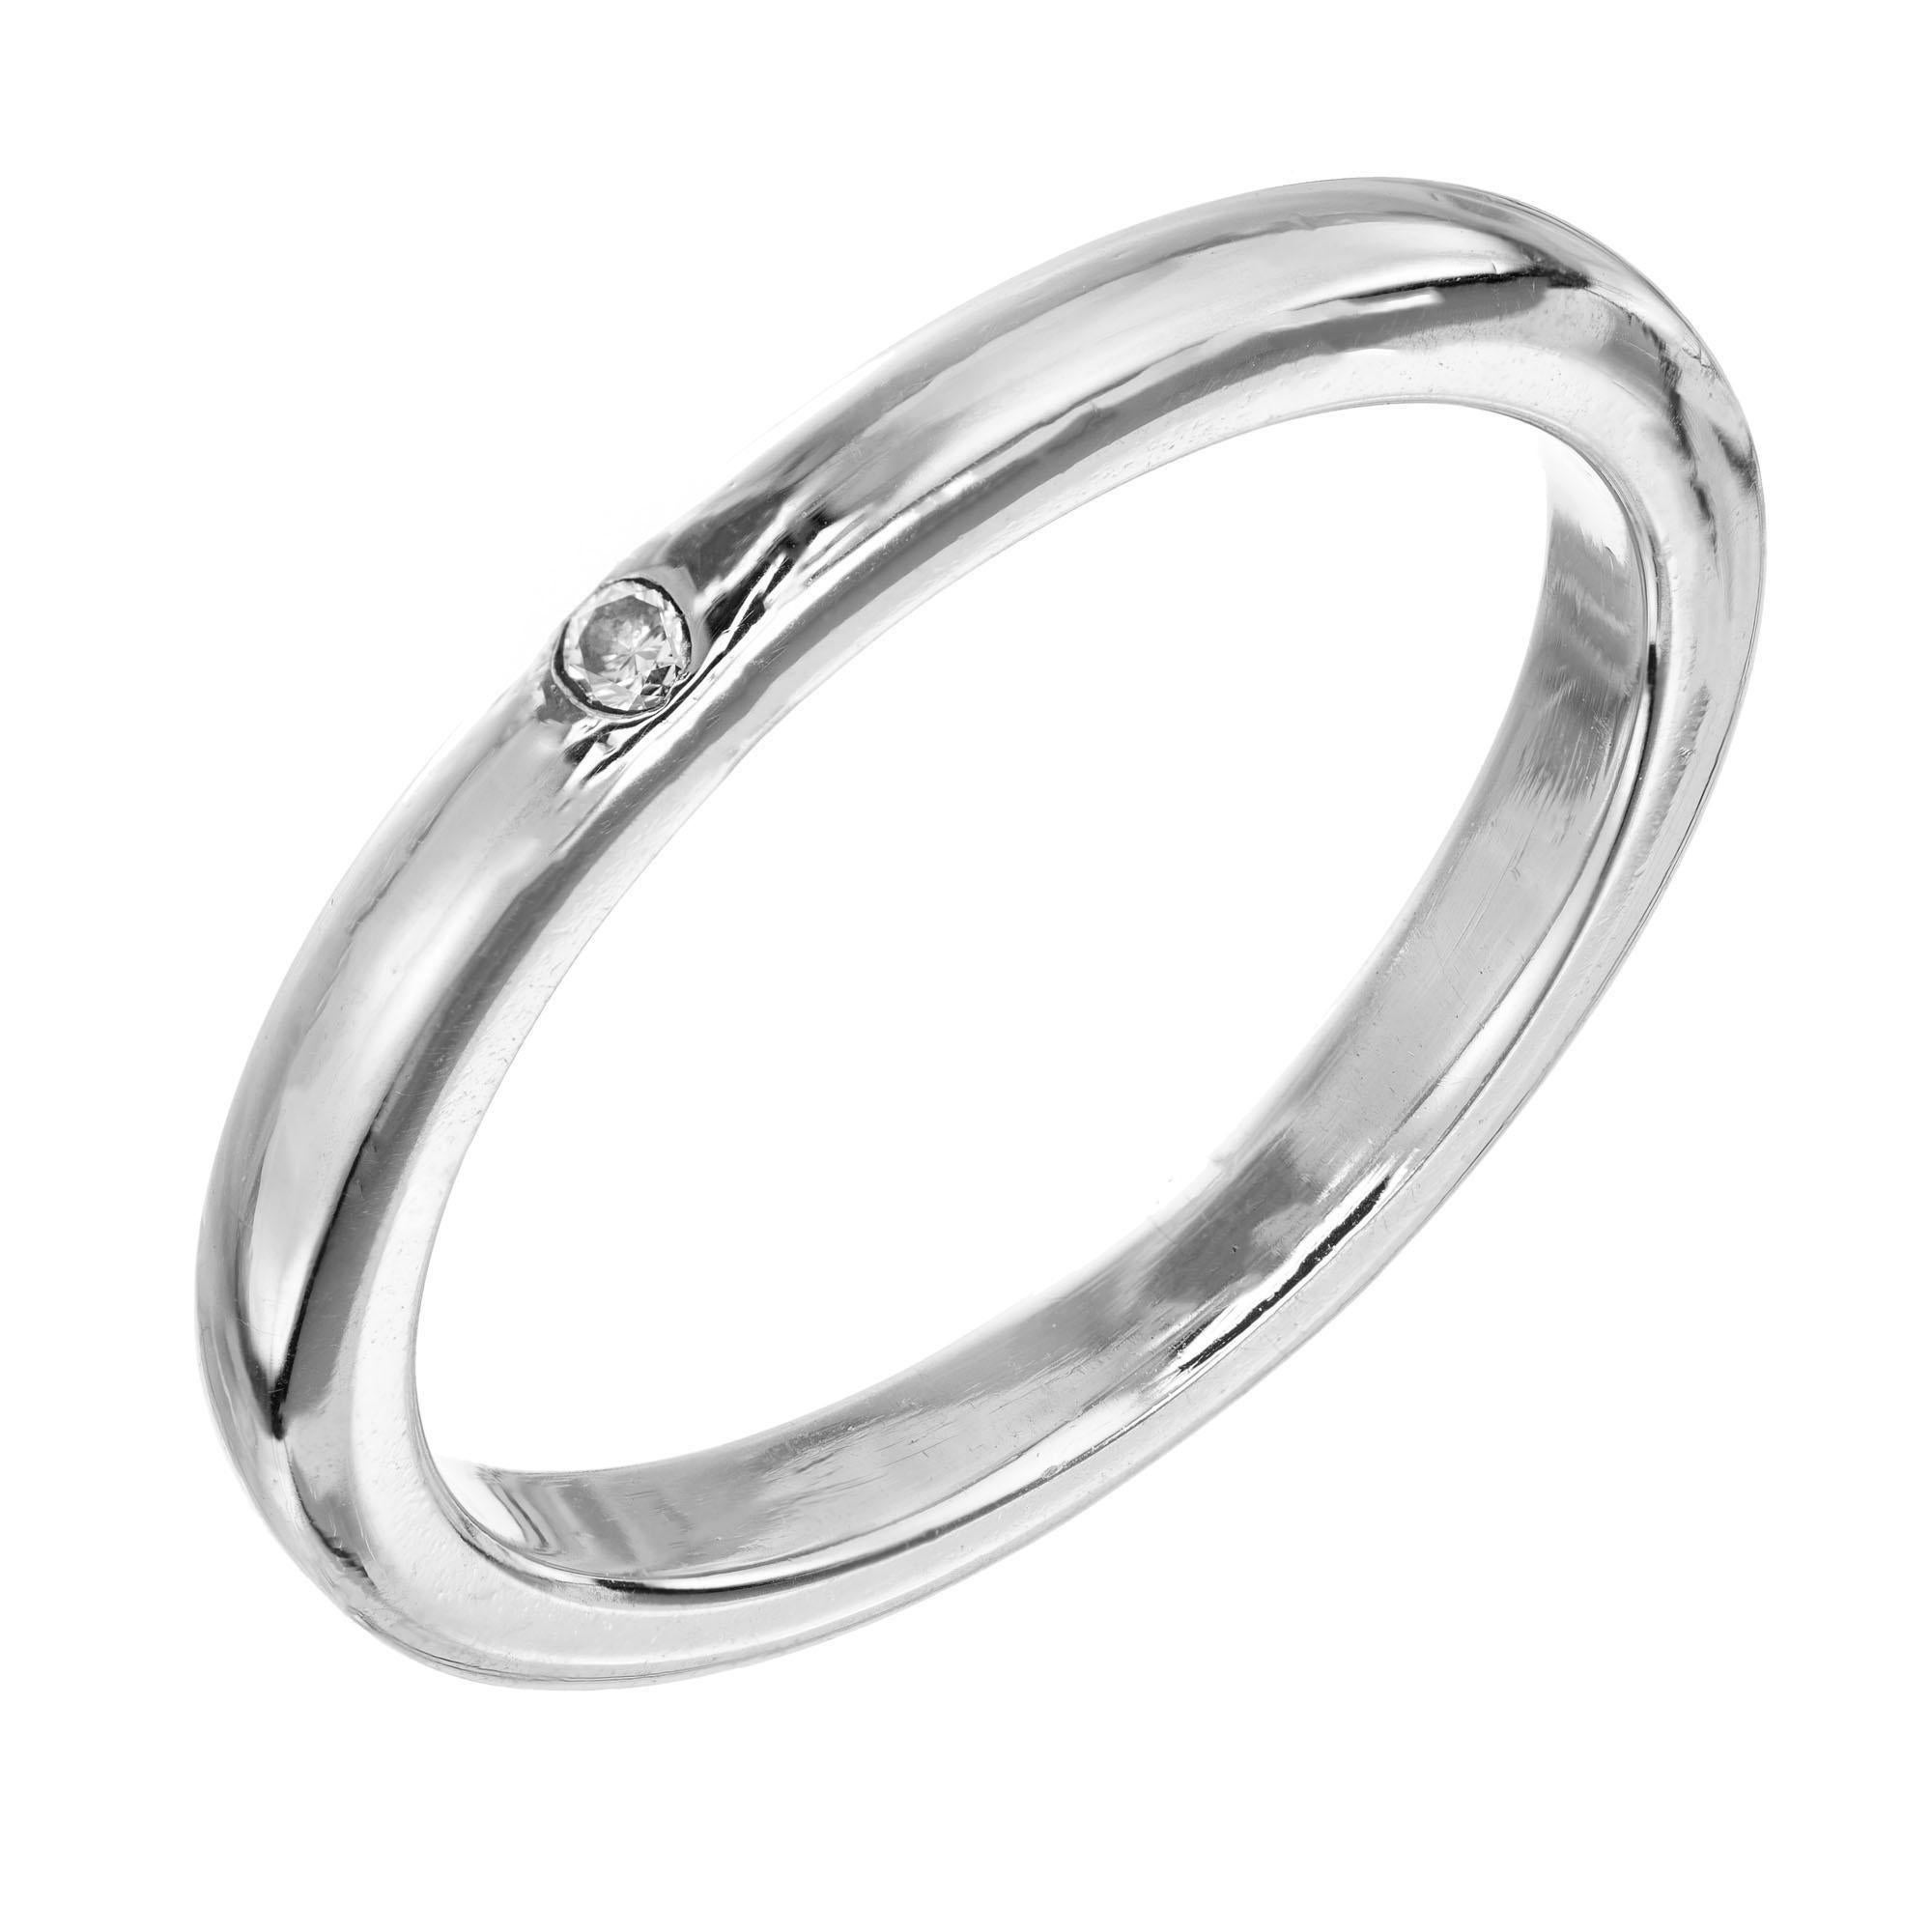 Platinum band ring with a round brilliant cut diamond design by Elsa Peretti for Tiffany & Co.

1 round brilliant cut diamond, G-H VS approx. .02cts
Size 5.5 and sizable.
Platinum 
Stamped: PT 950
Hallmark: Tiffany & Co Peretti 
5.2 grams
Width at